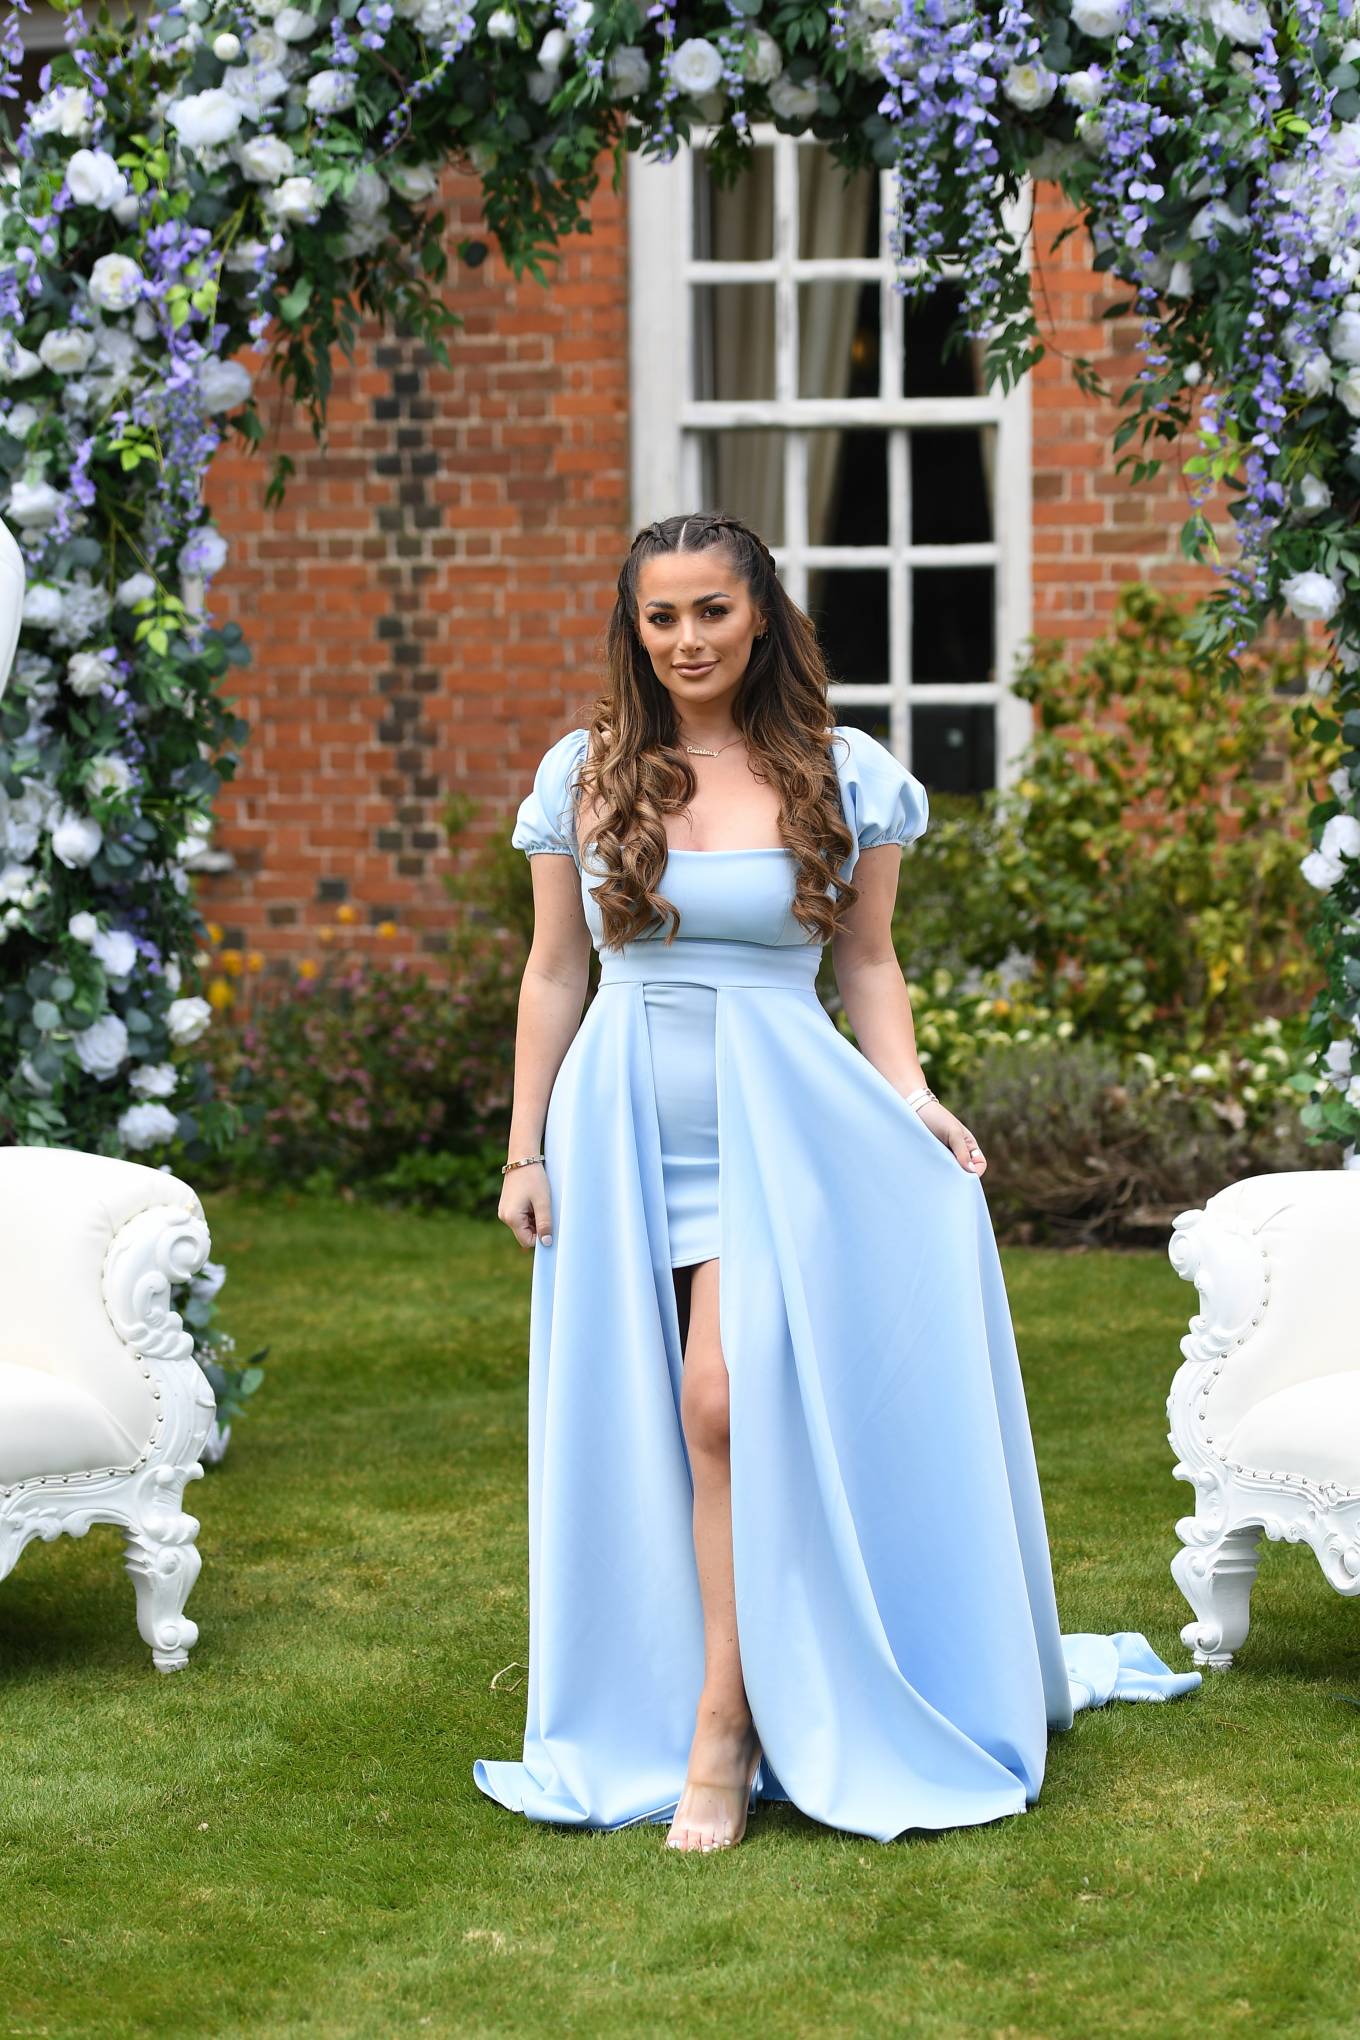 Courtney Green 2021 : Courtney Green – The Only Way is Essex TV Show filming – Bridgerton Special in Essex-07